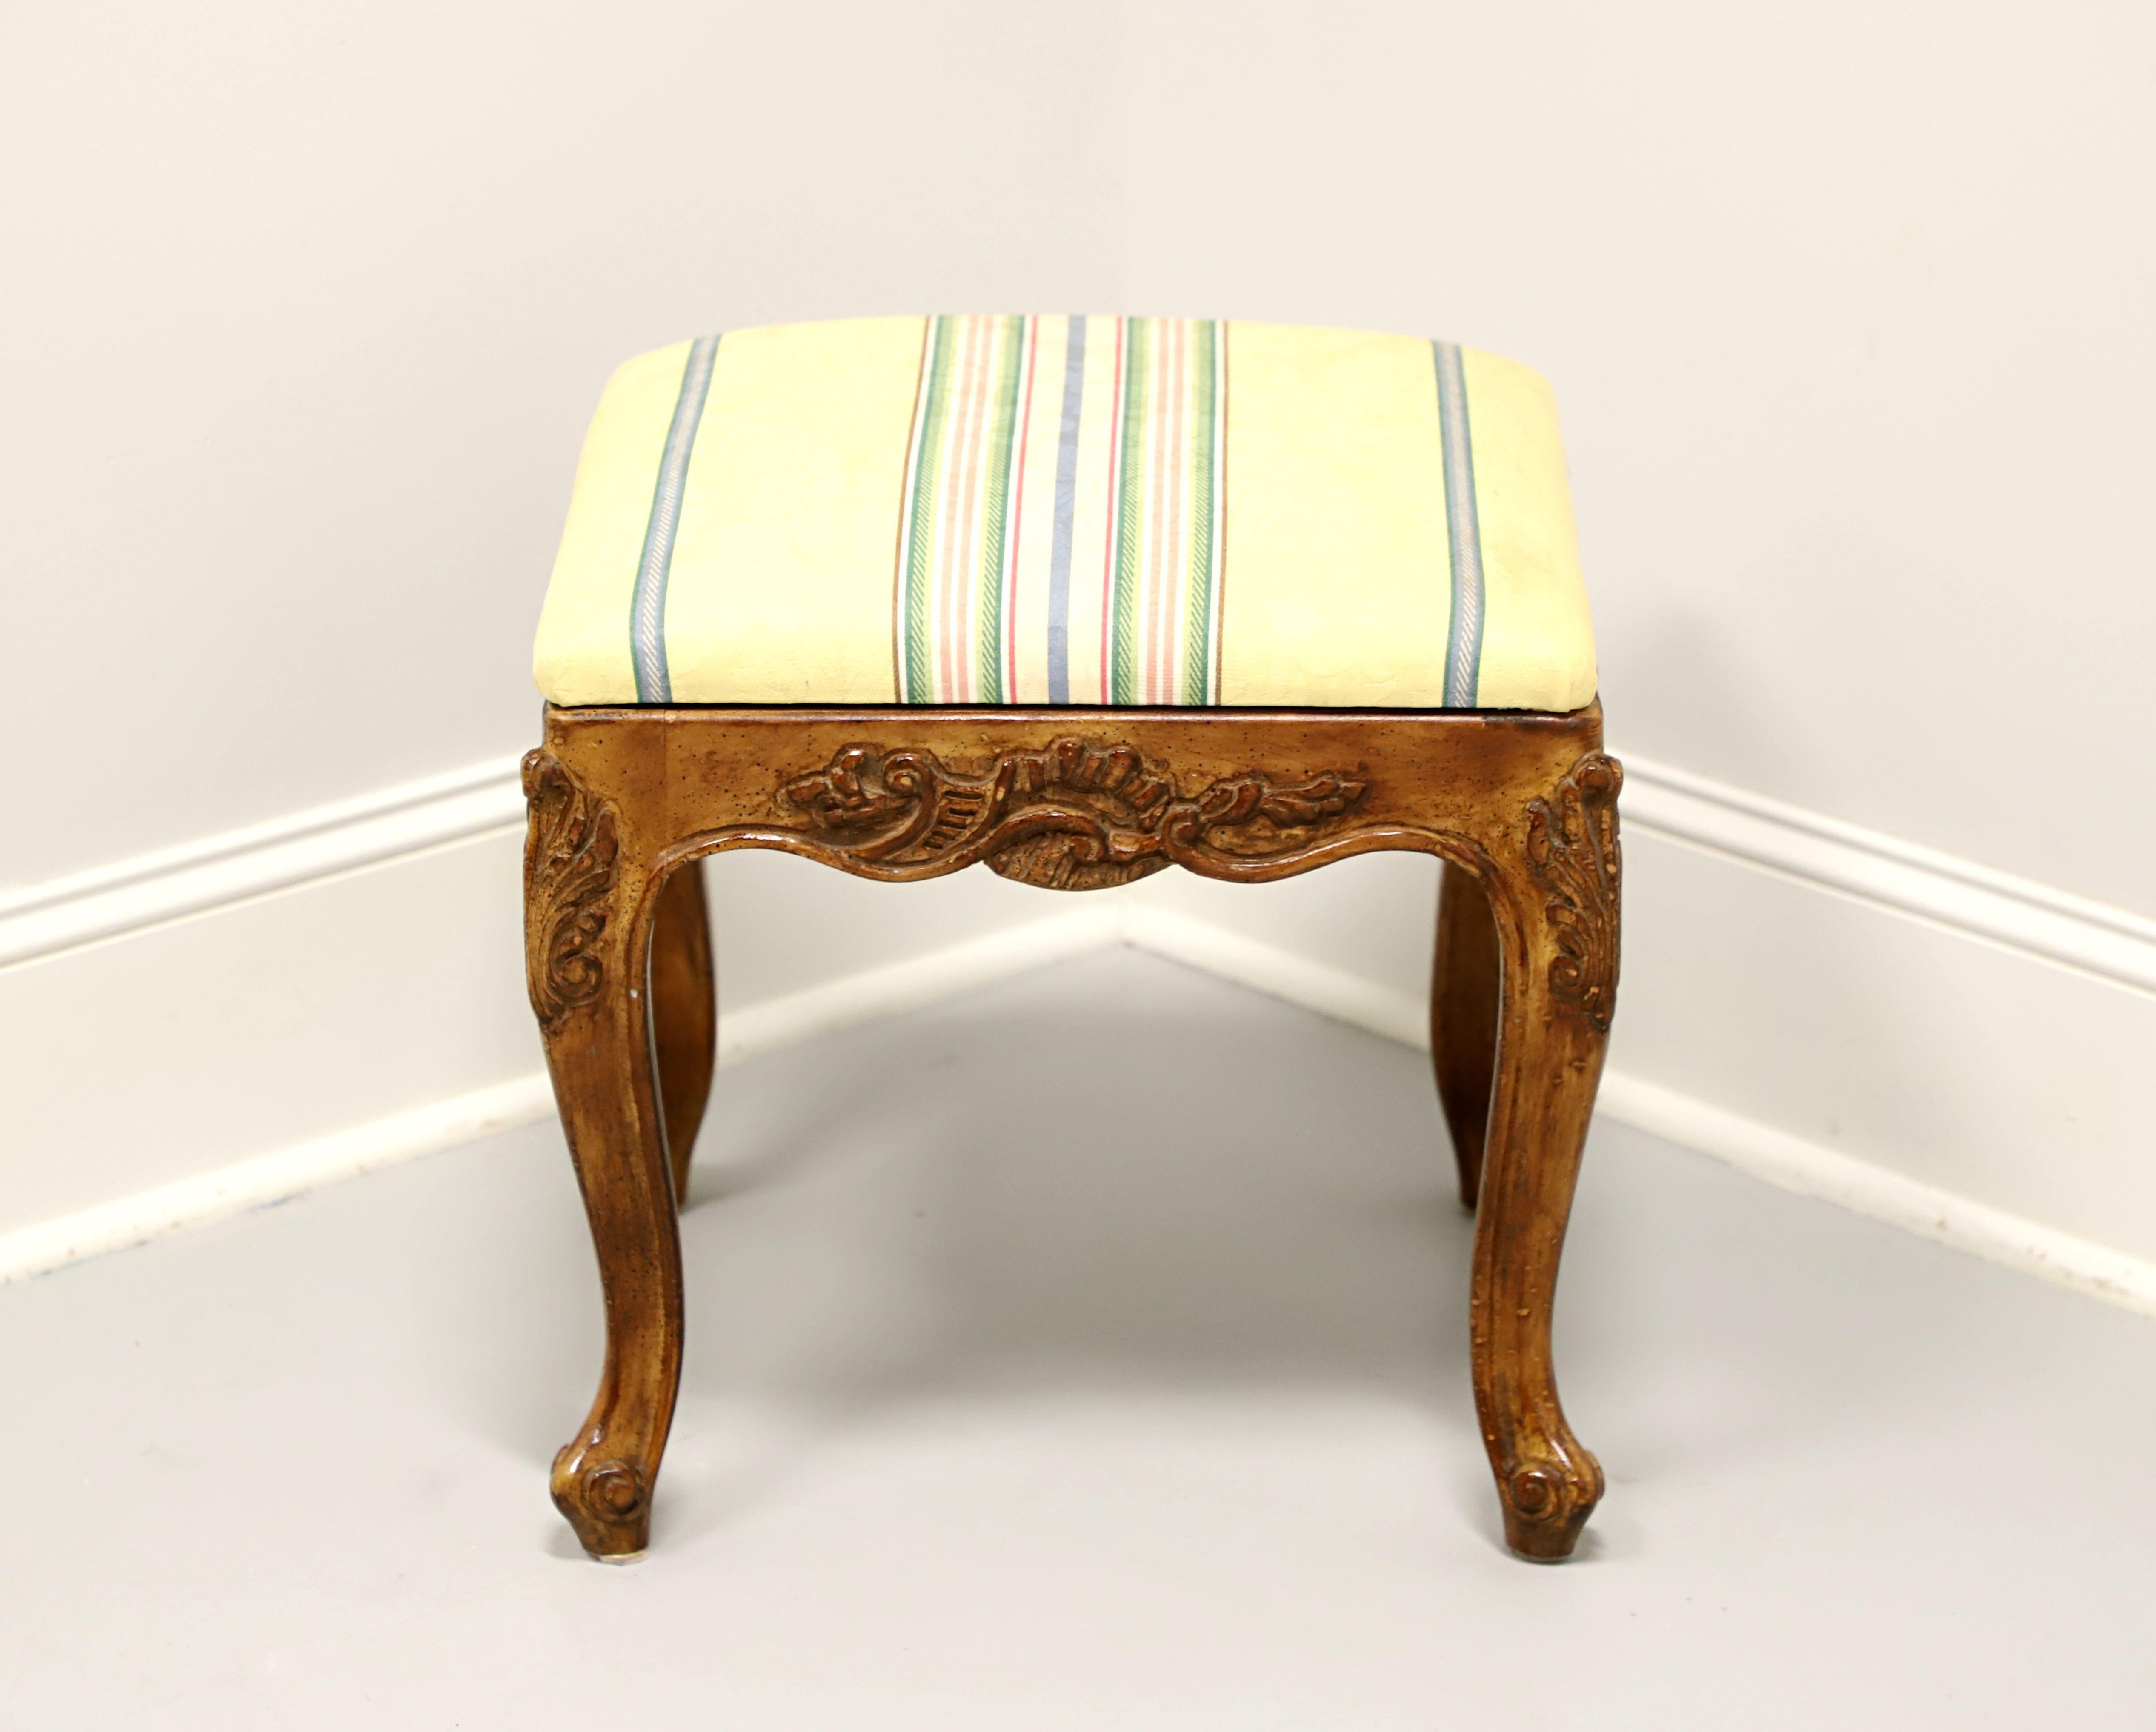 A French Country style bench footstool, unbranded, similar quality to Henredon. Walnut with a distressed finish, yellow, blue, pink, green, white color striped fabric upholstered seat, carved apron & knees, curved legs and scroll feet. Made in the